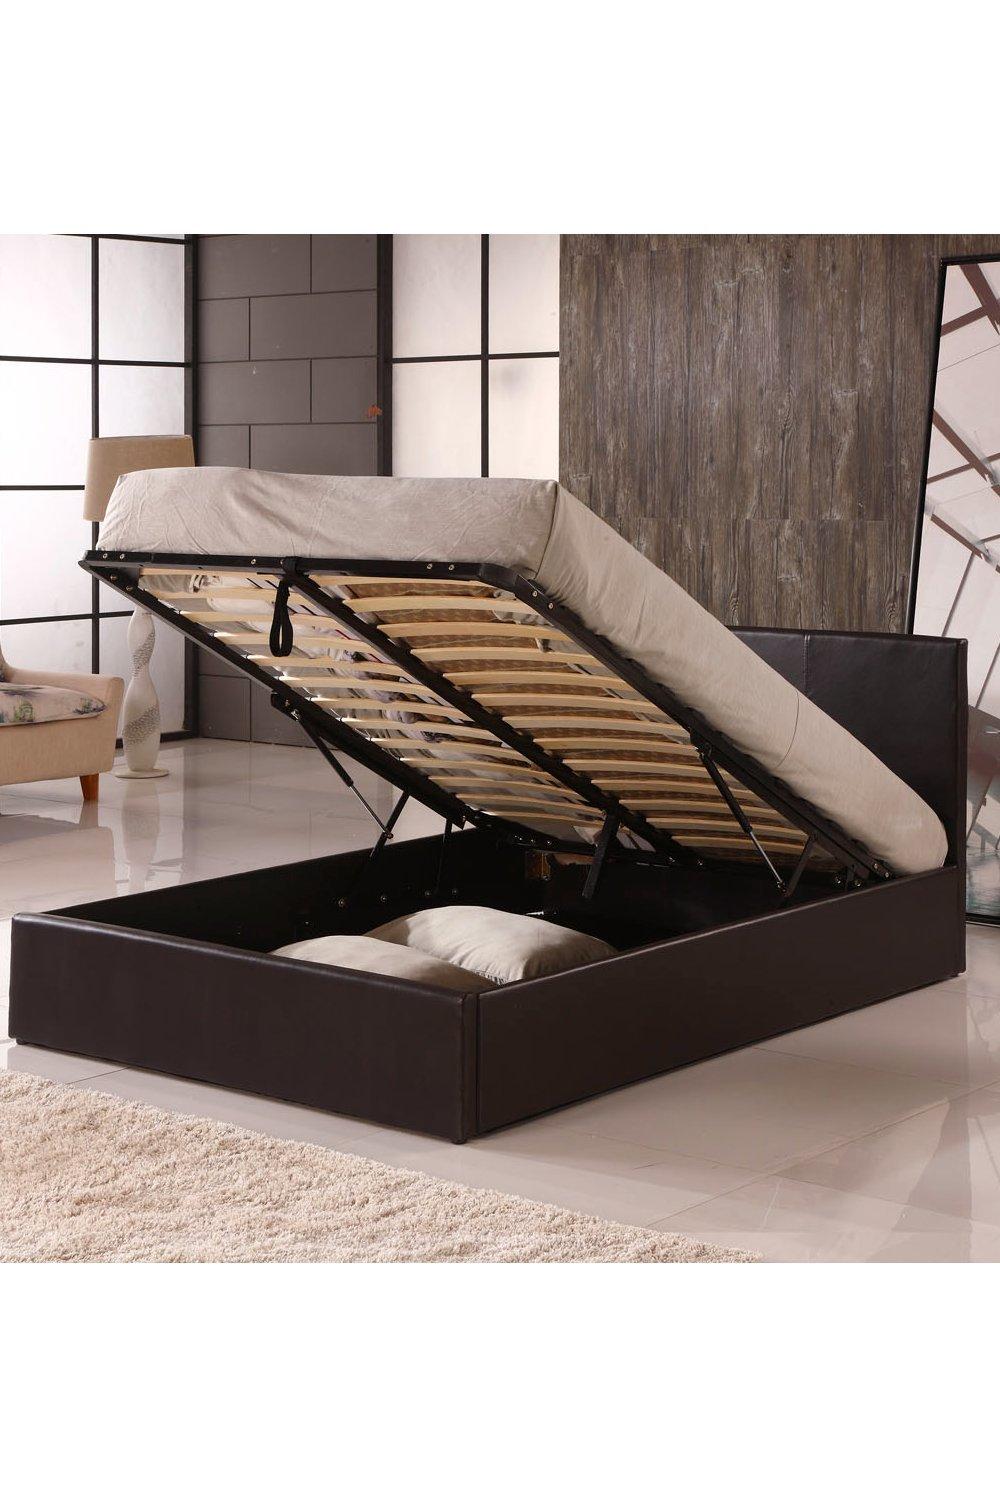 Ottoman Double Storage Bed Faux Leather with Gas Lift Up Base